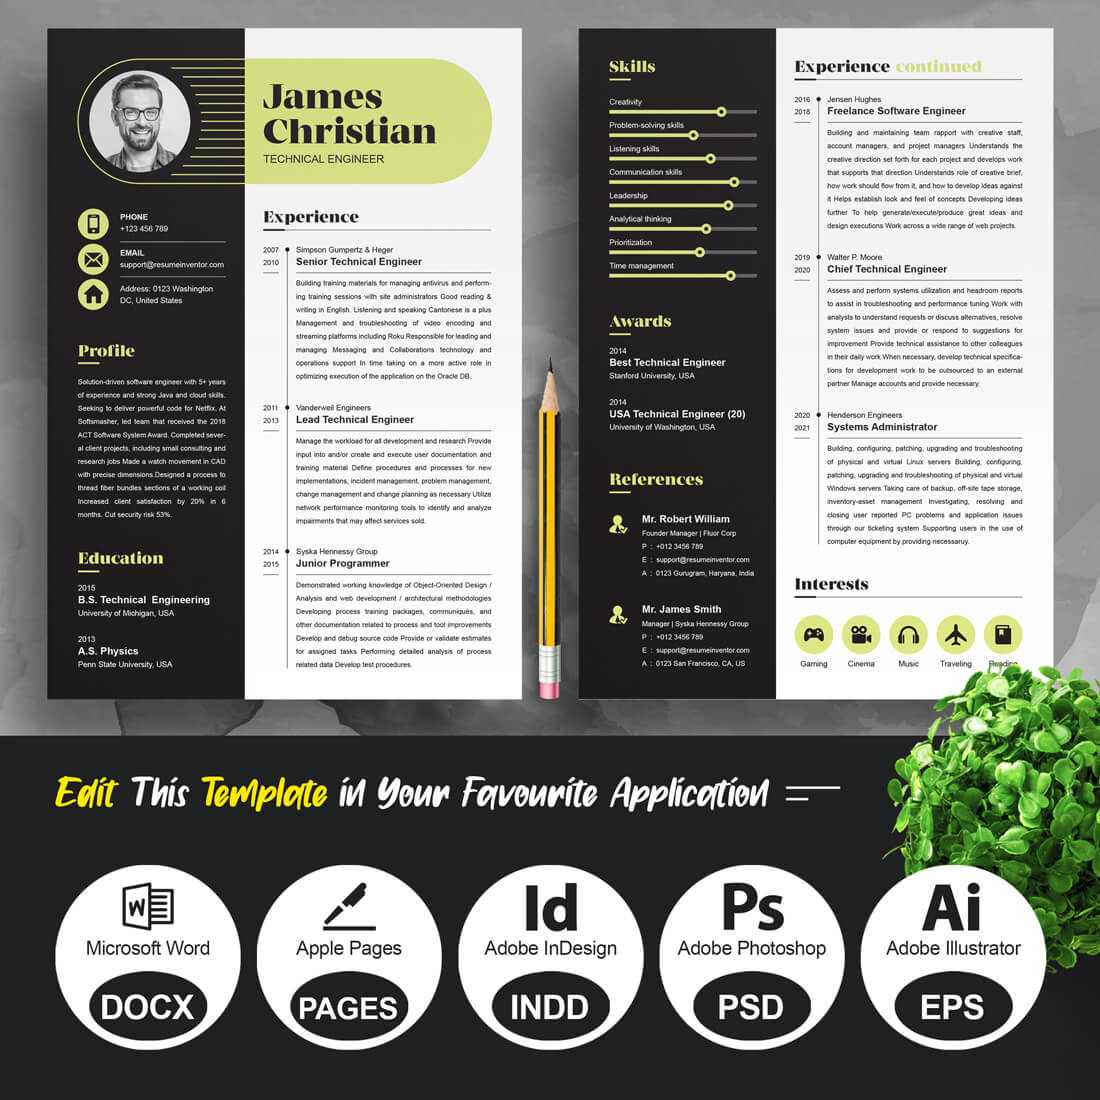 Technical Engineer Resume Template | Creative Resume Design cover image.